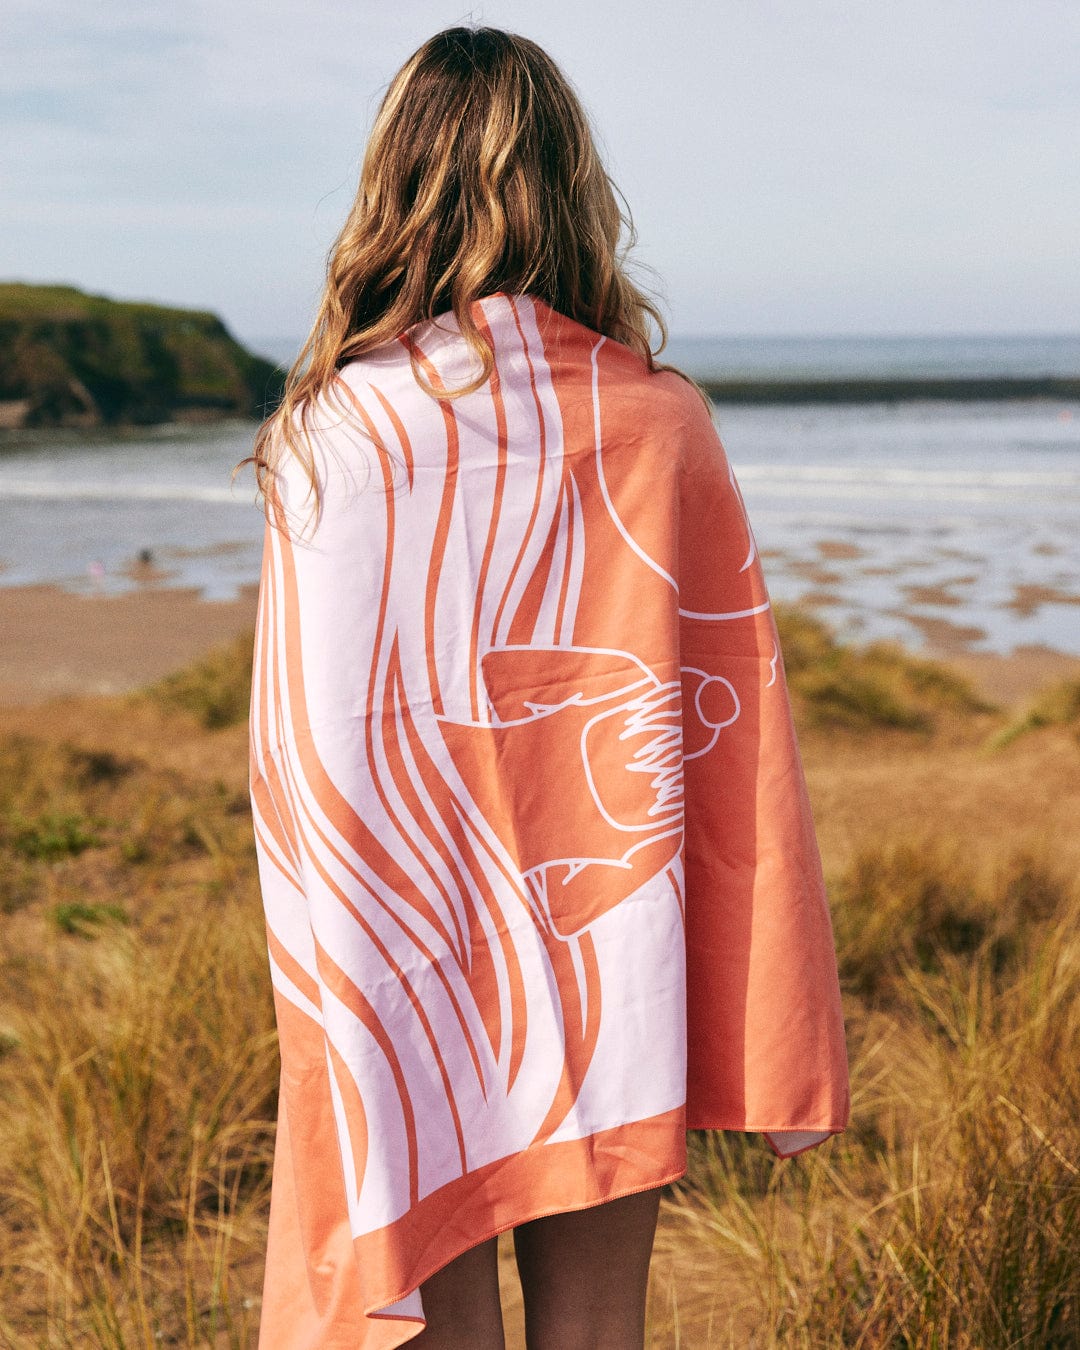 Woman standing on a beach, facing the sea, with a Cold Water Club - Microfibre Towel - Orange towel draped over her shoulders.